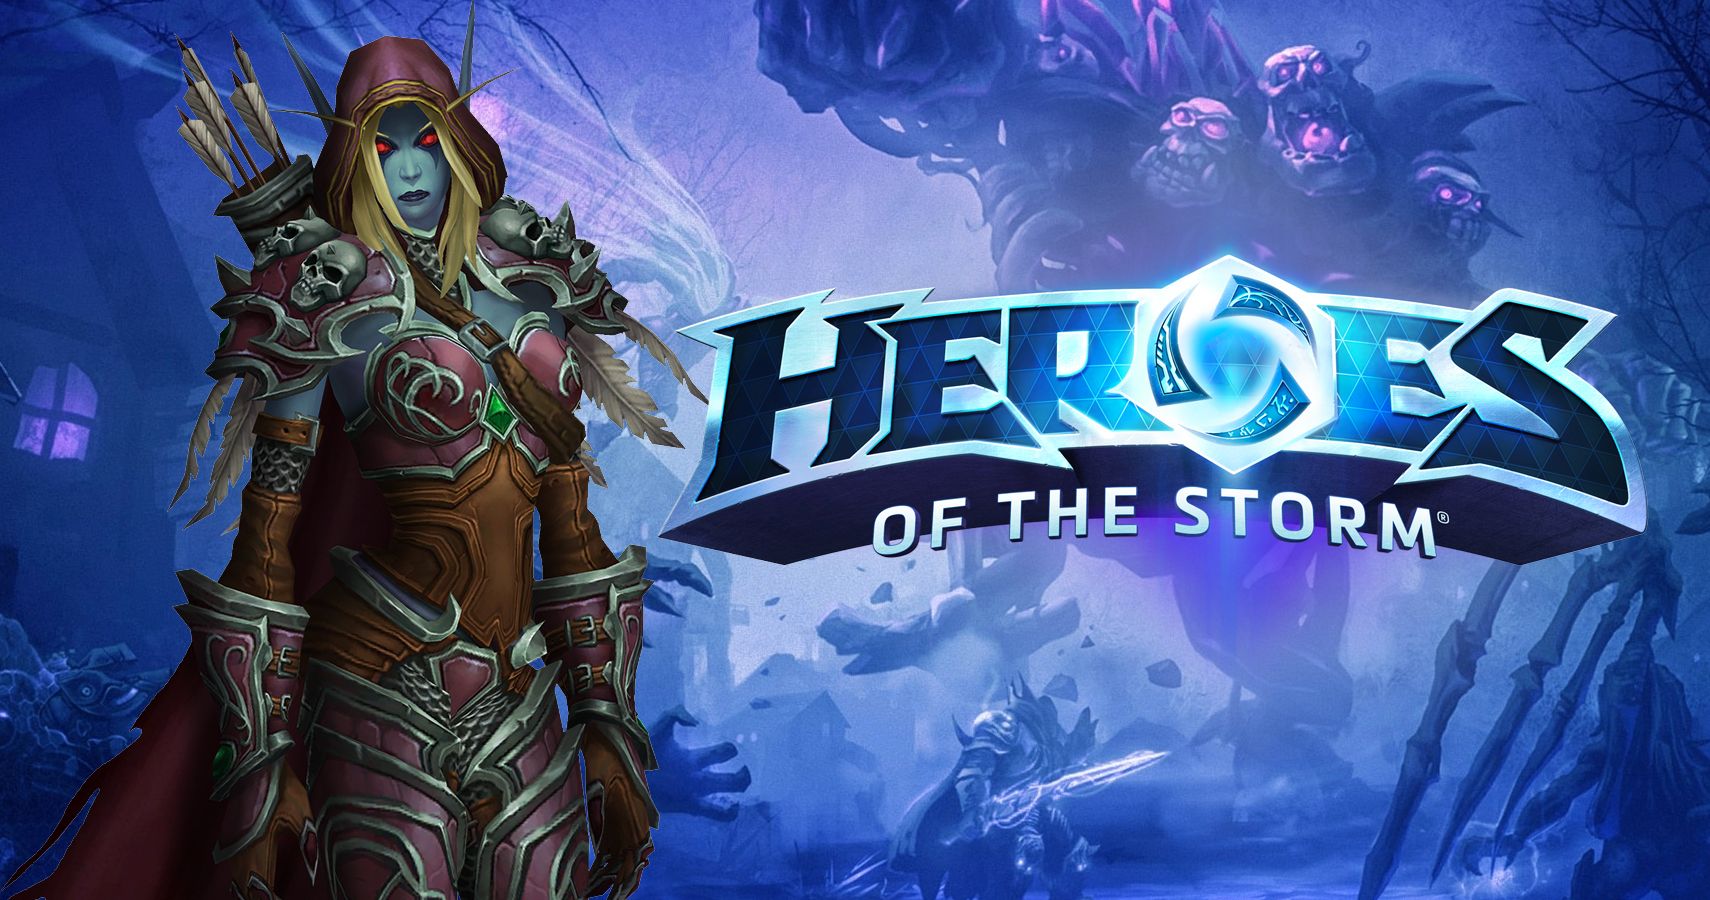 free download sylvanas heroes of the storm